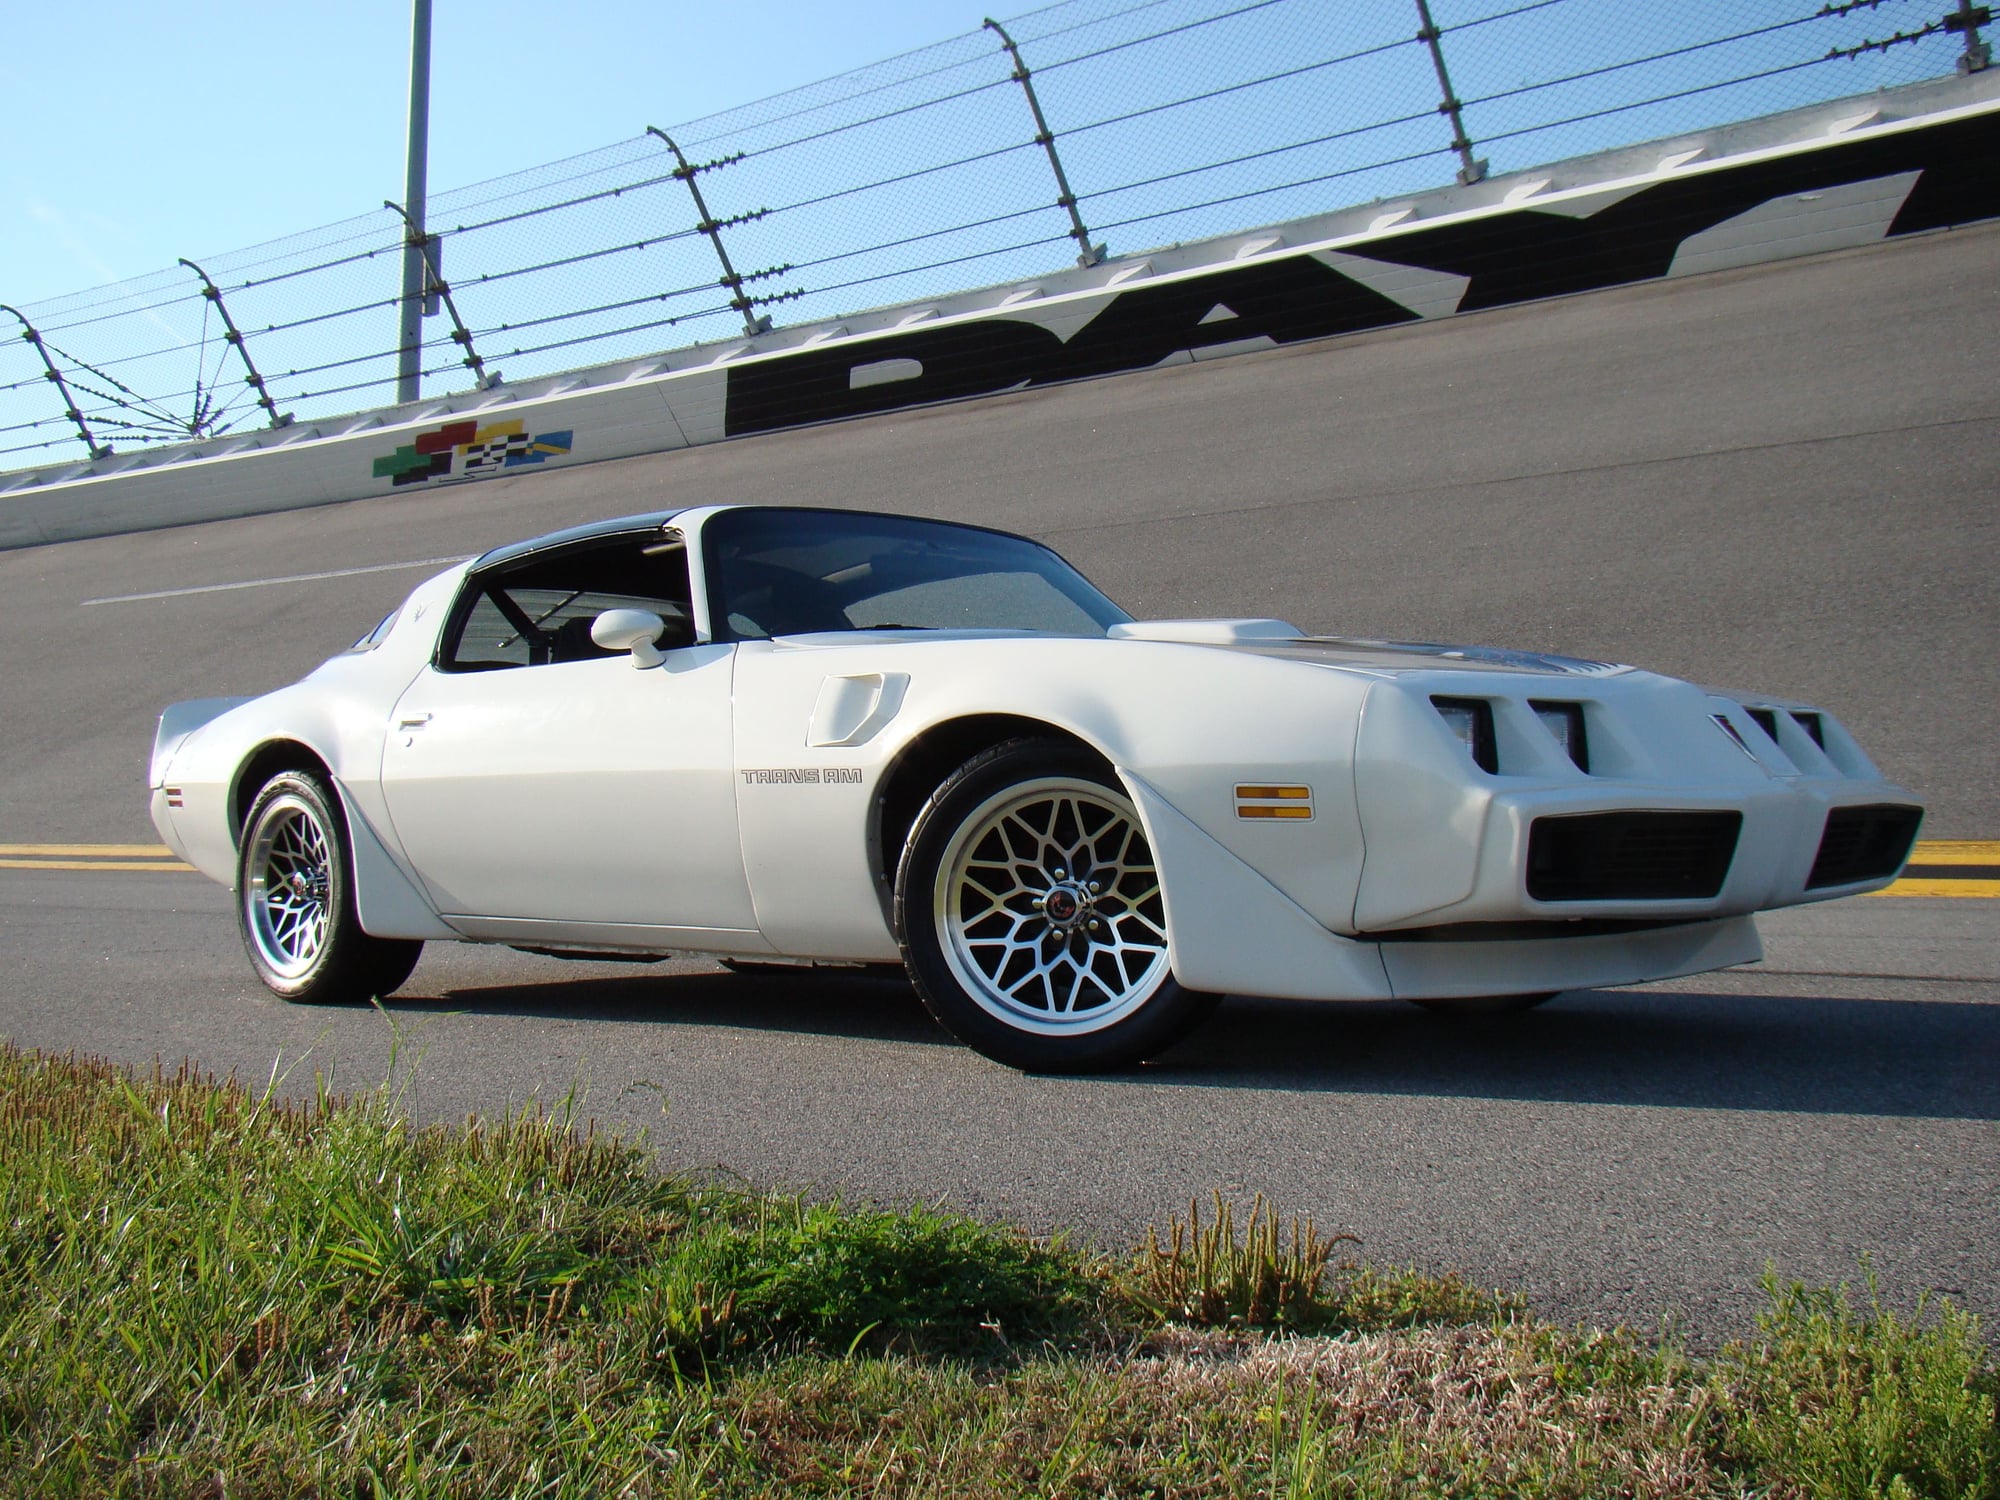 1980 Pontiac Firebird - 1980 Pontiac Trans Am LS Swap 6 Speed Pro-Touring T-Top Car (By Pettie Performance) - Used - VIN coming soon - 8 cyl - 2WD - Manual - White - Athens, AL 35613, United States